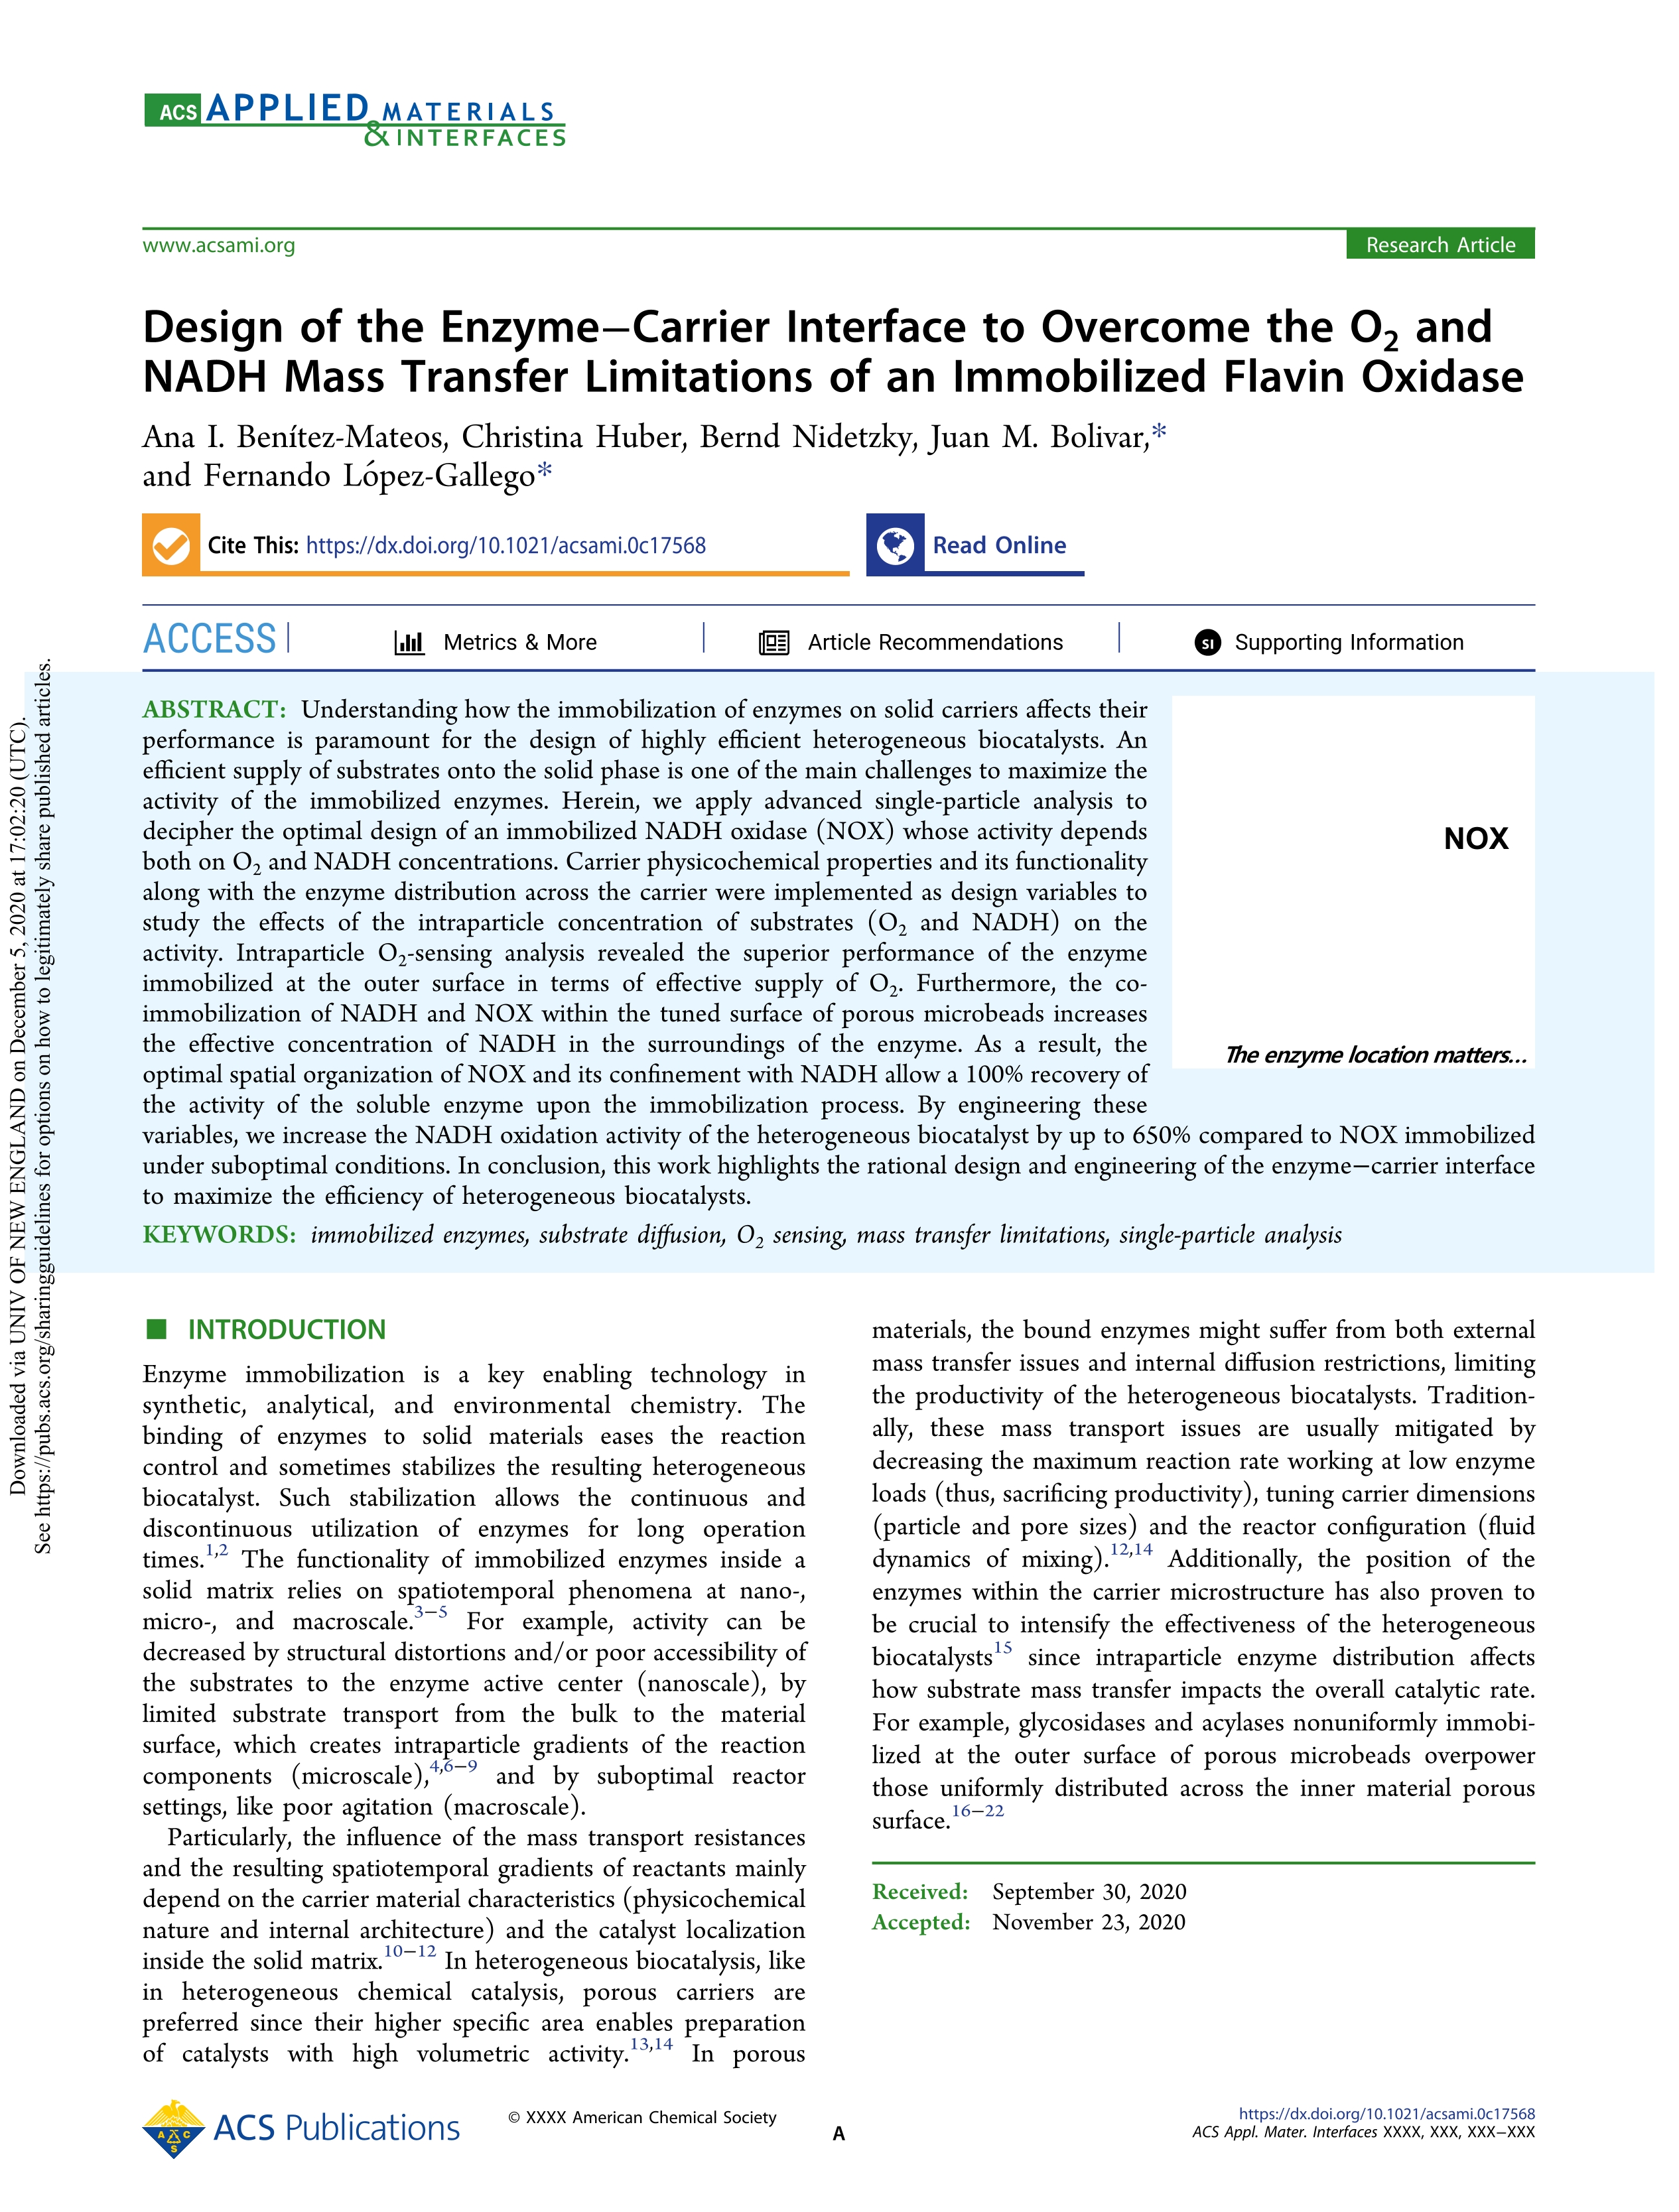 Design of the Enzyme-Carrier Interface to Overcome the O2 and NADH Mass Transfer Limitations of an Immobilized Flavin Oxidase